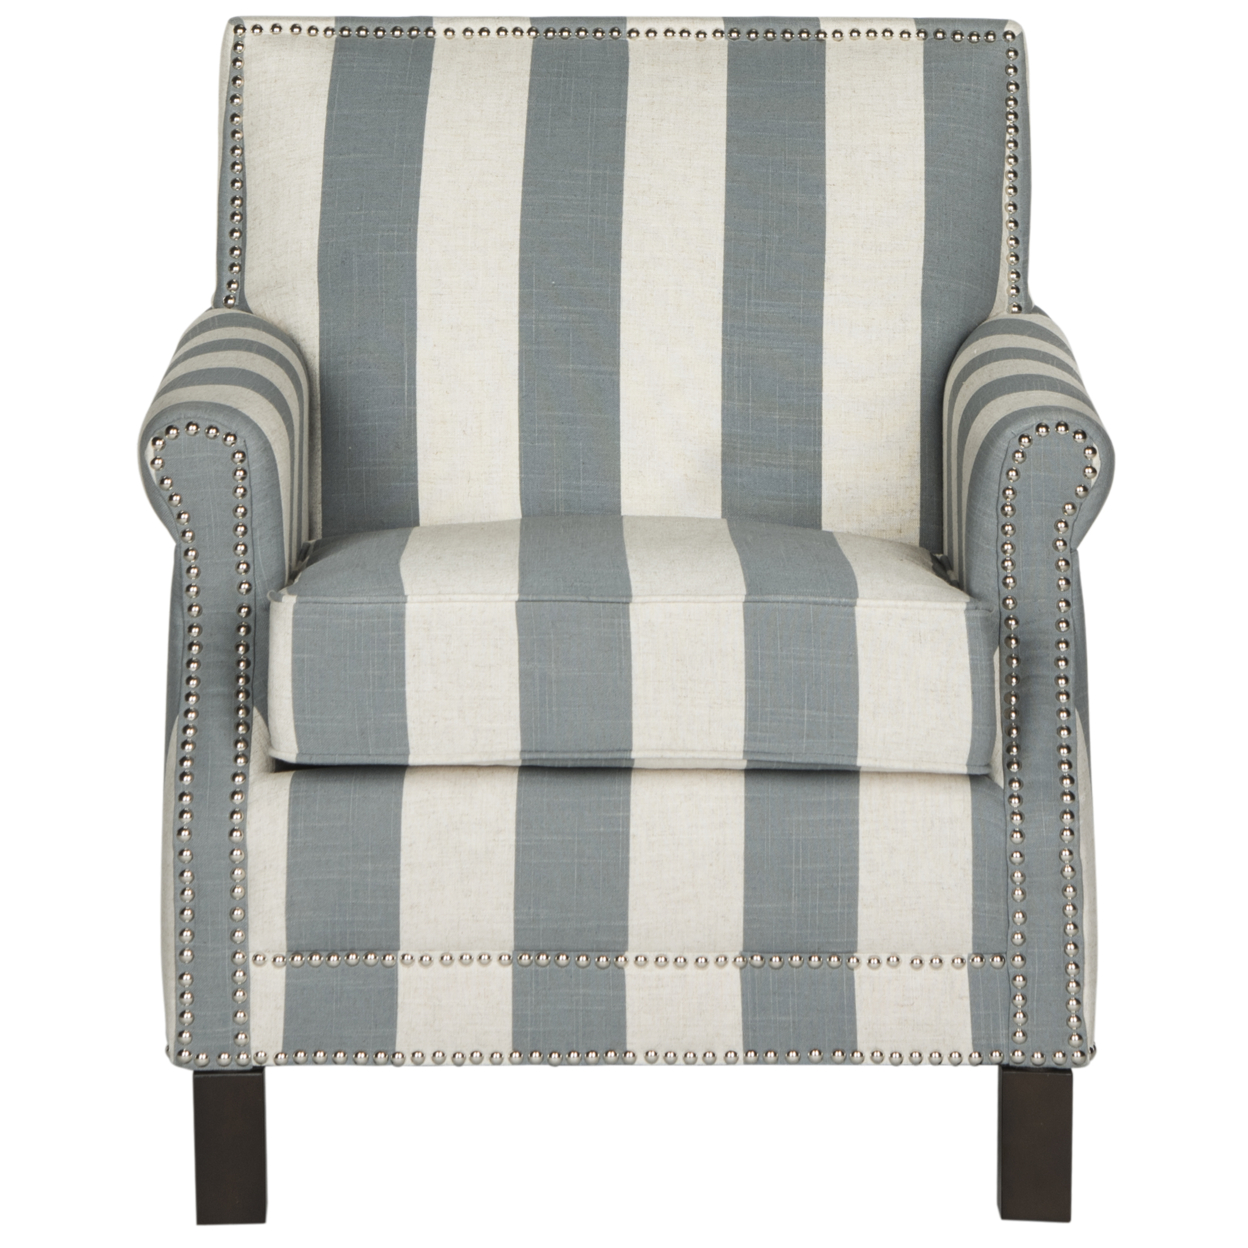 SAFAVIEH Easton Rustic Glam Upholstered Club Chair w/ Nailheads, Grey/White - image 1 of 5